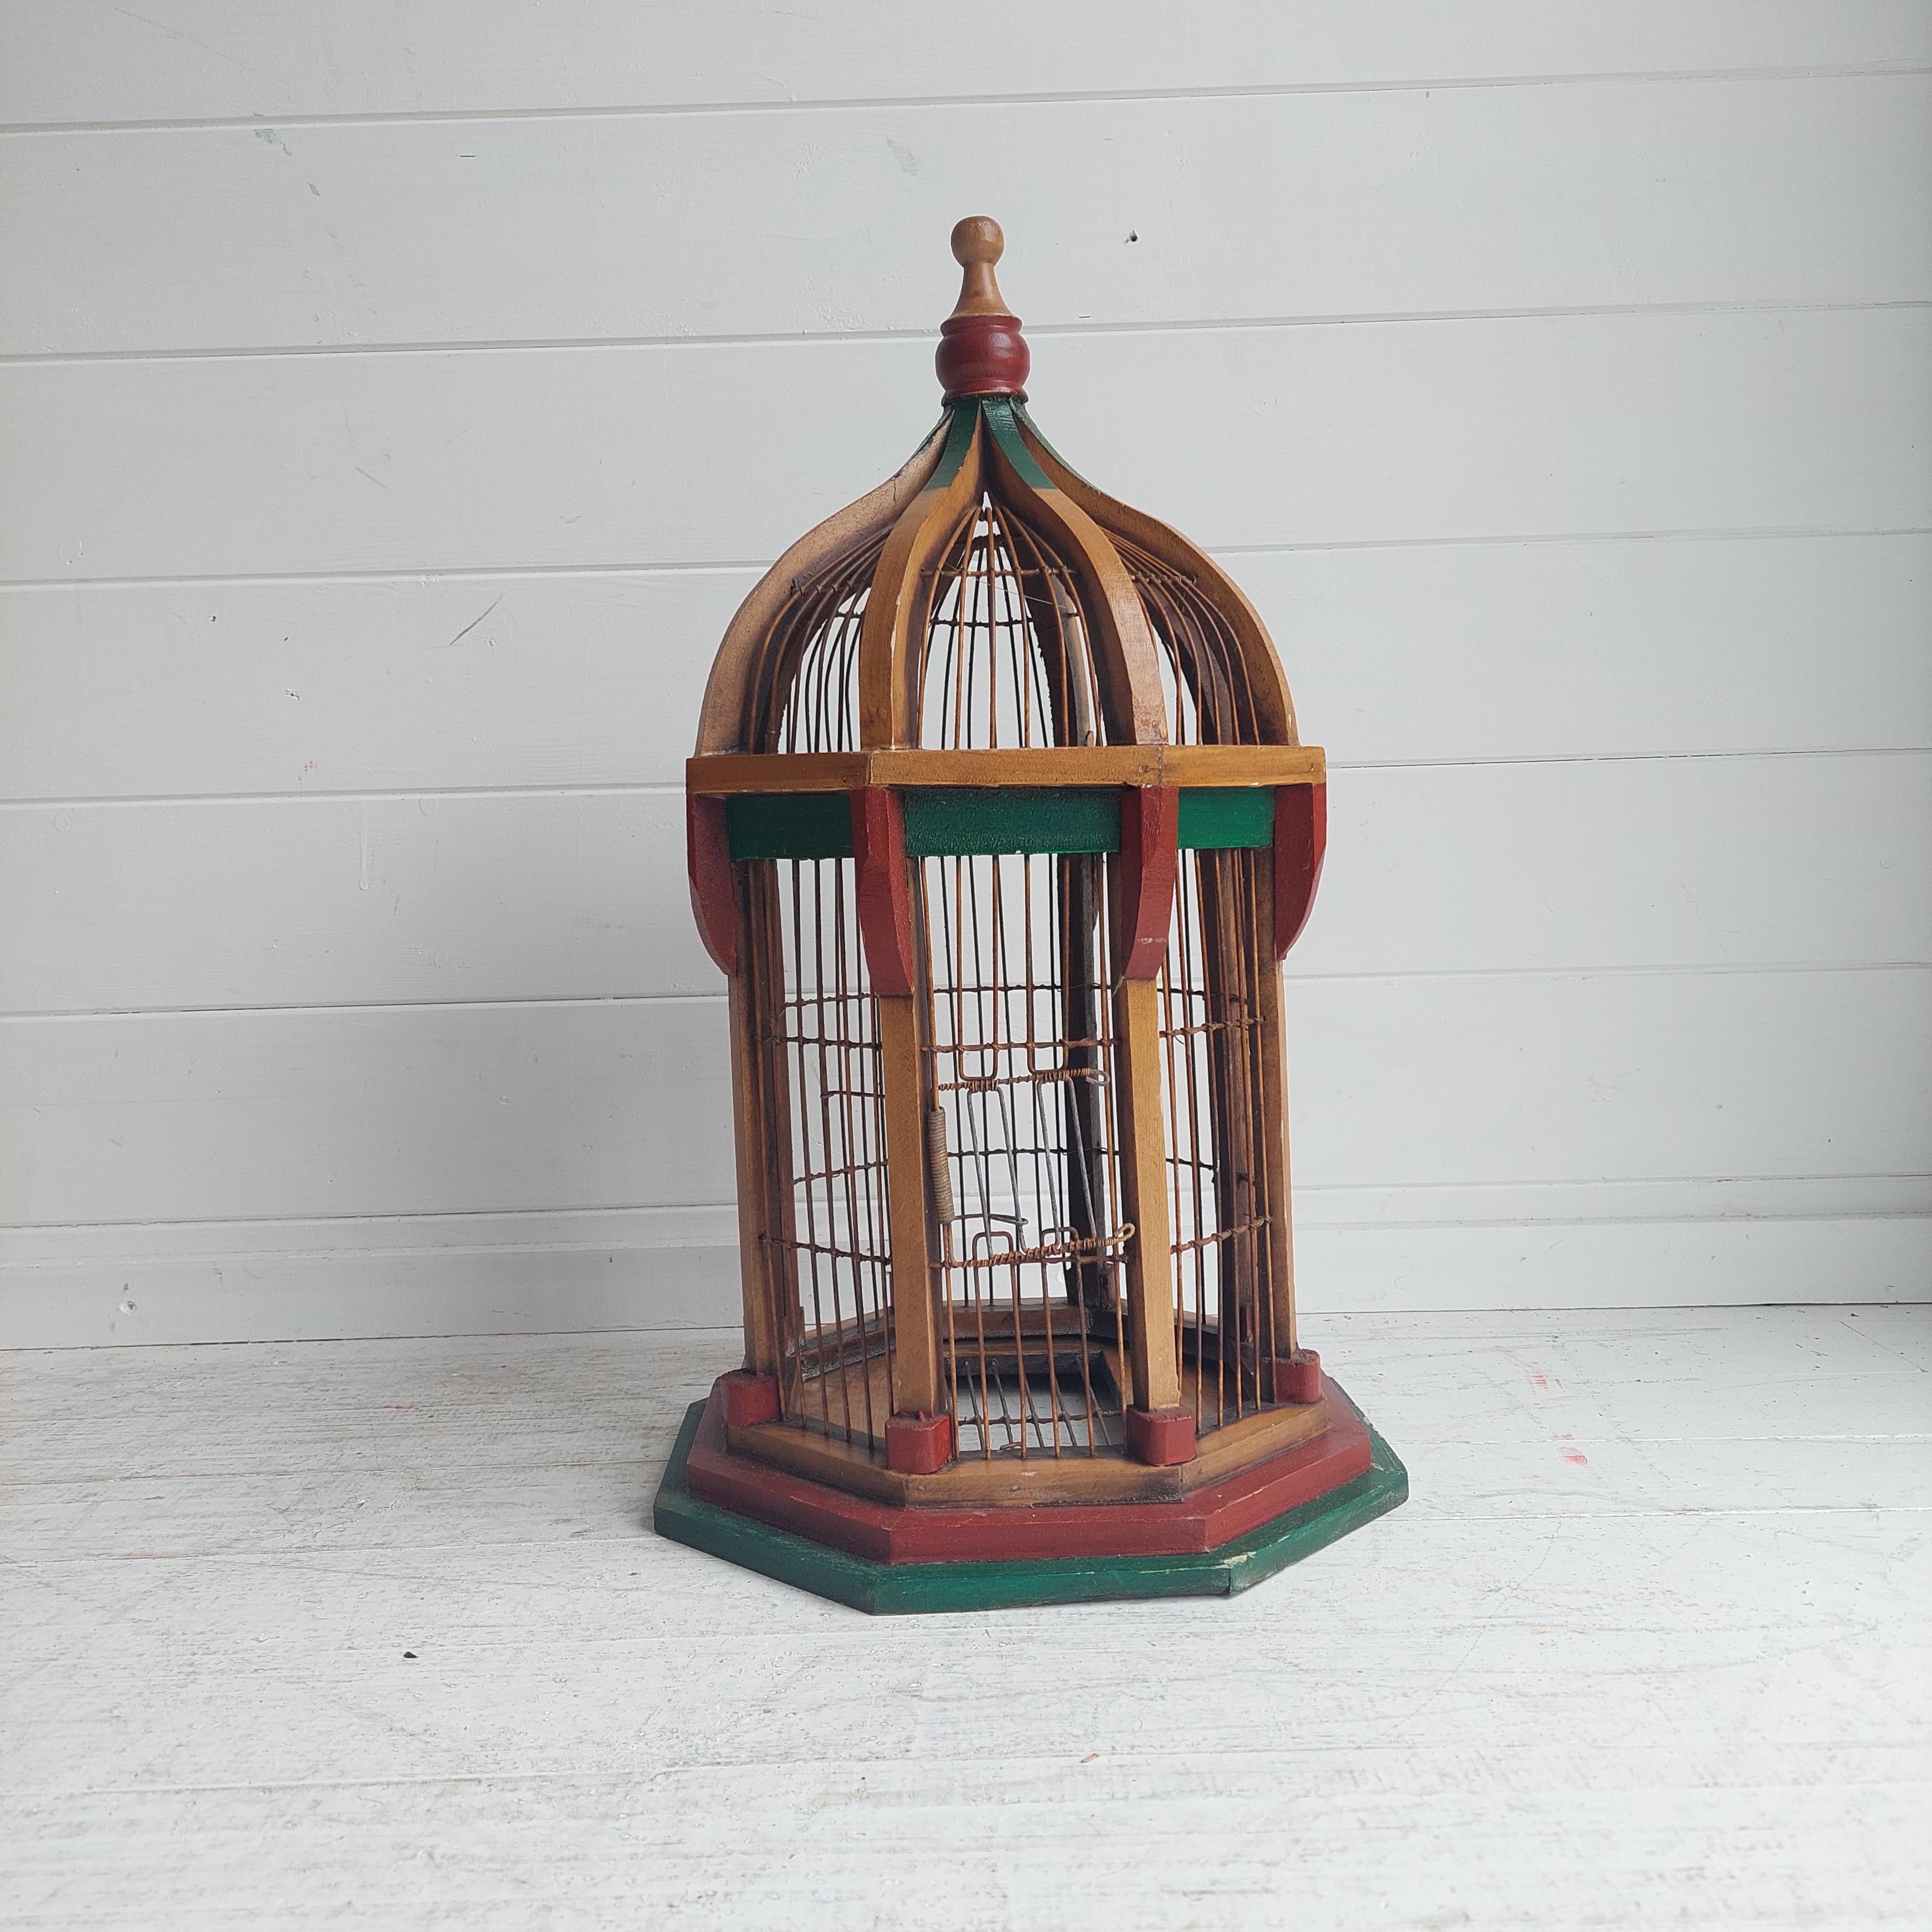 Hand-Painted Antique  Architectural Dome Painted Bird Cage, Victorian Style